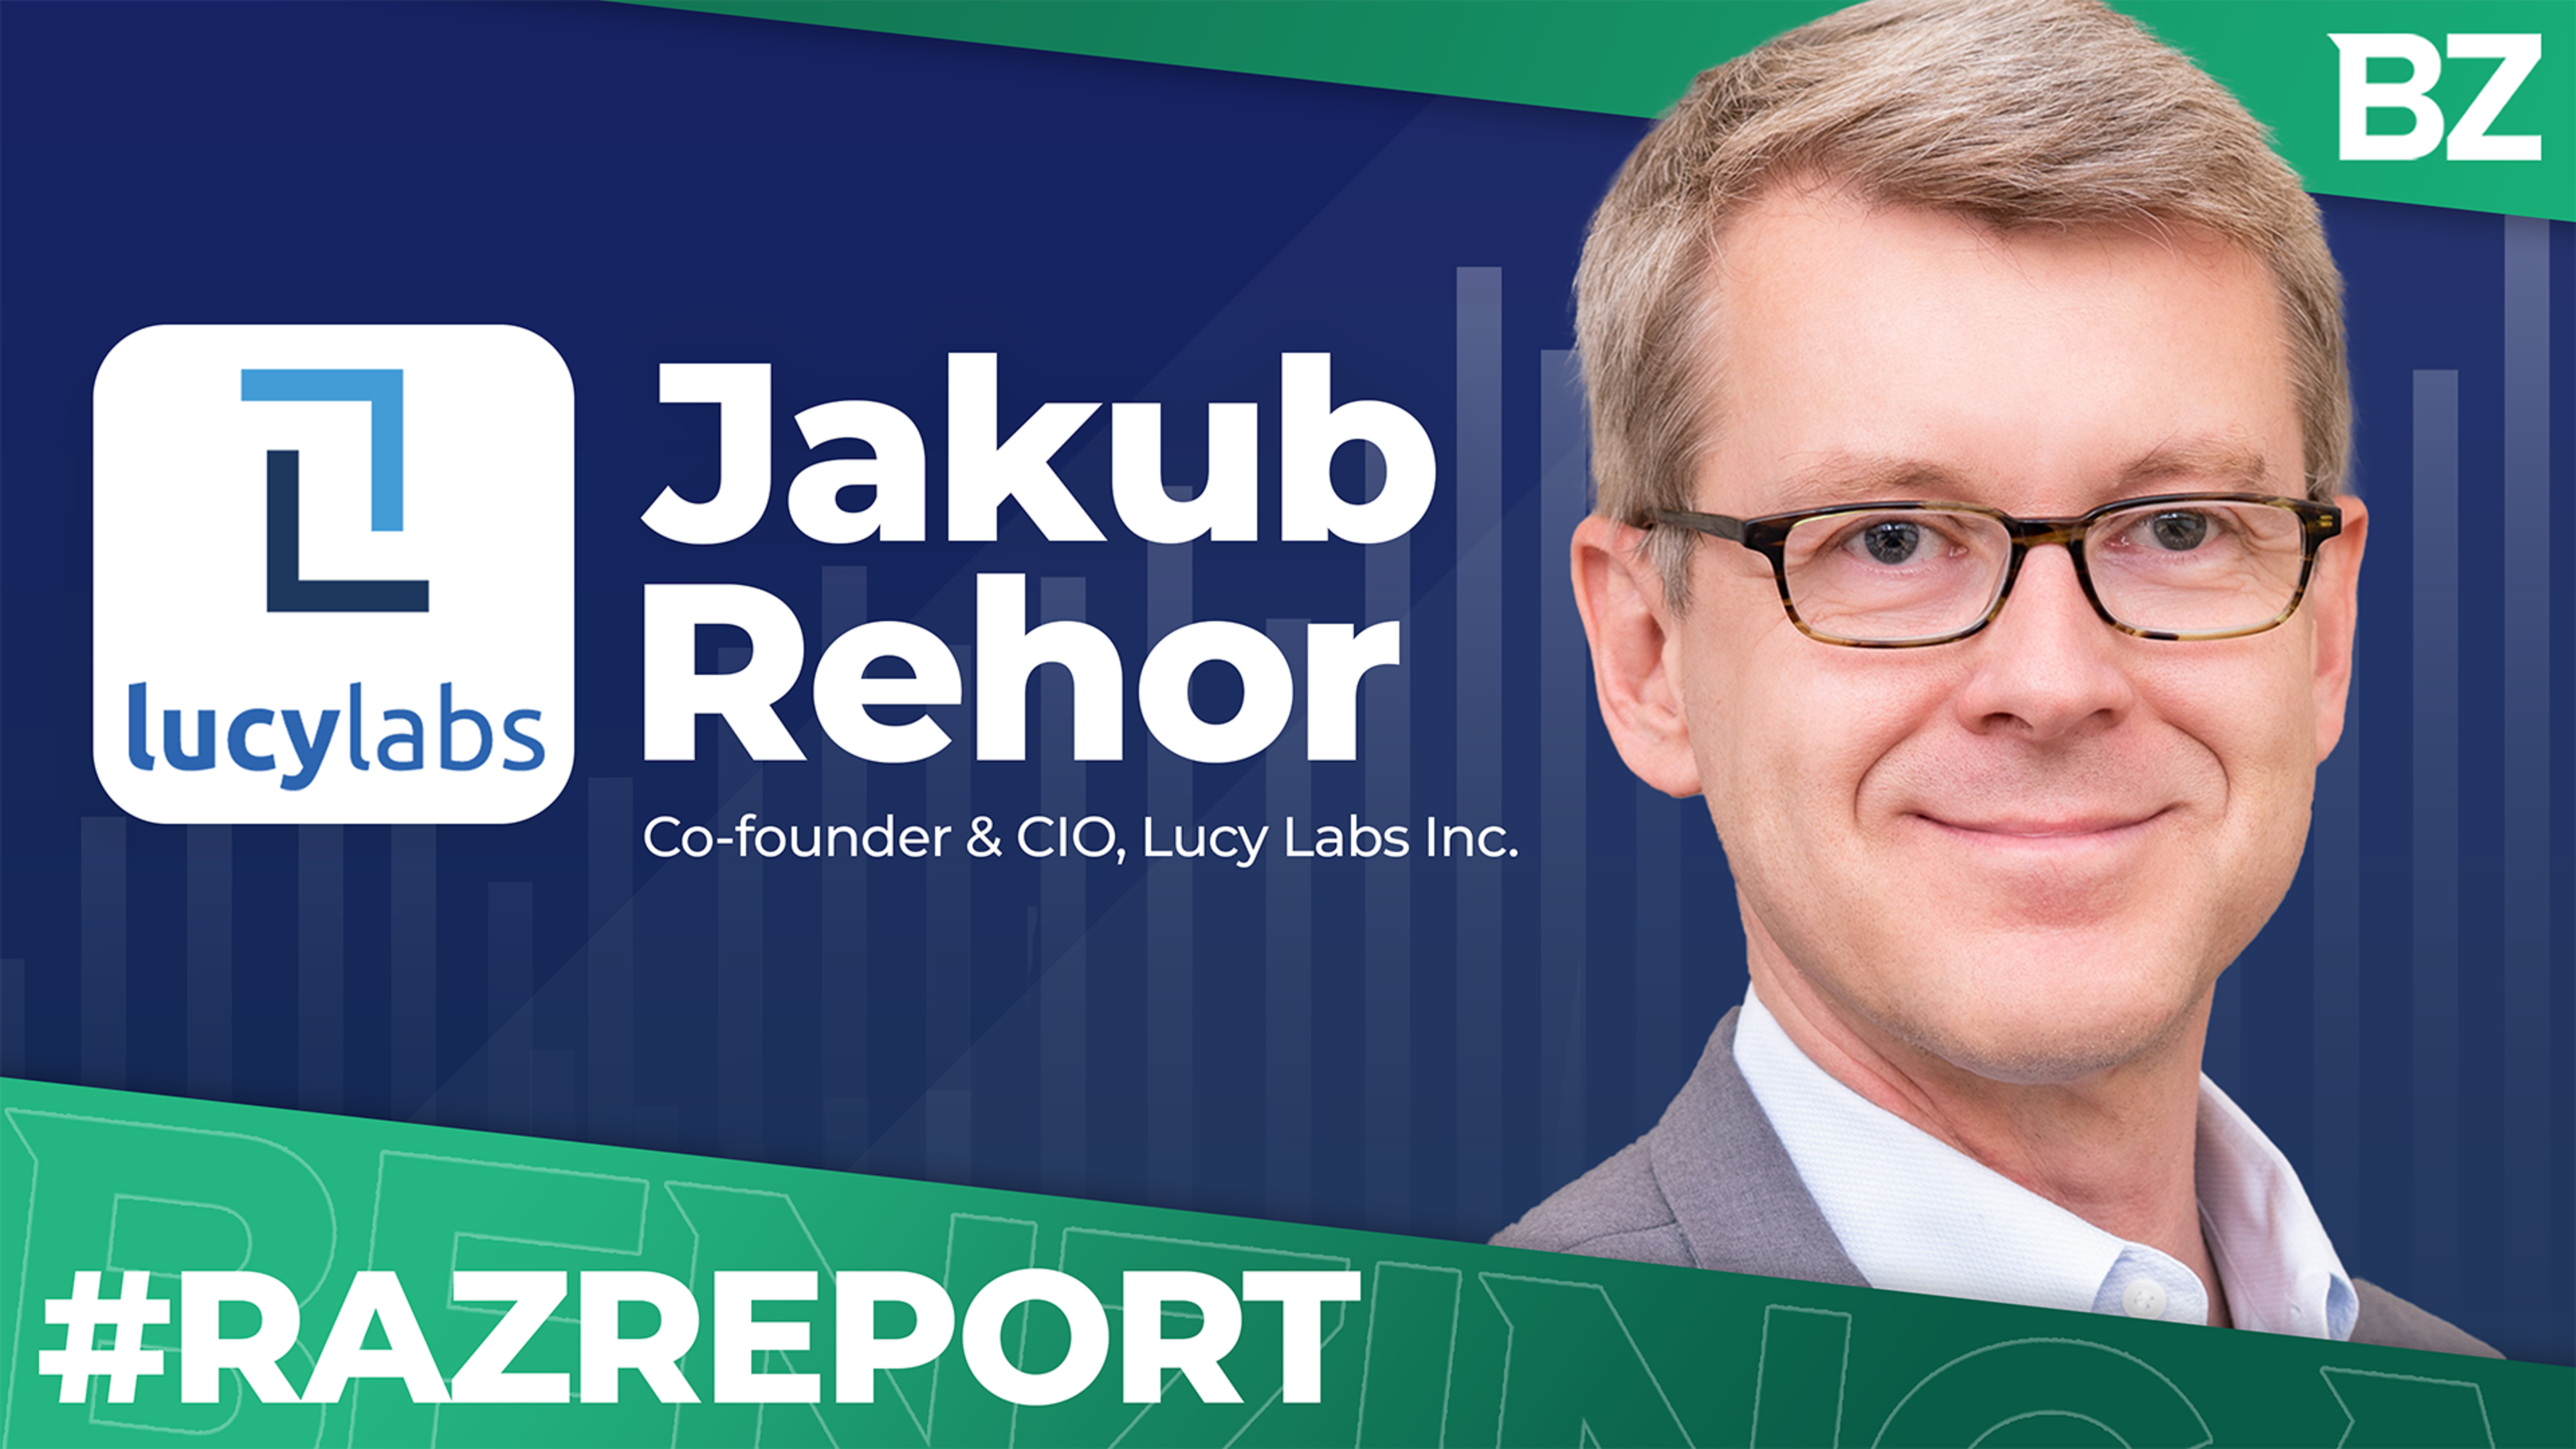 The RazReport Podcast: The Future Of Crypto Trading with Jakub Rehor, Co-Founder and CIO of Lucy Labs